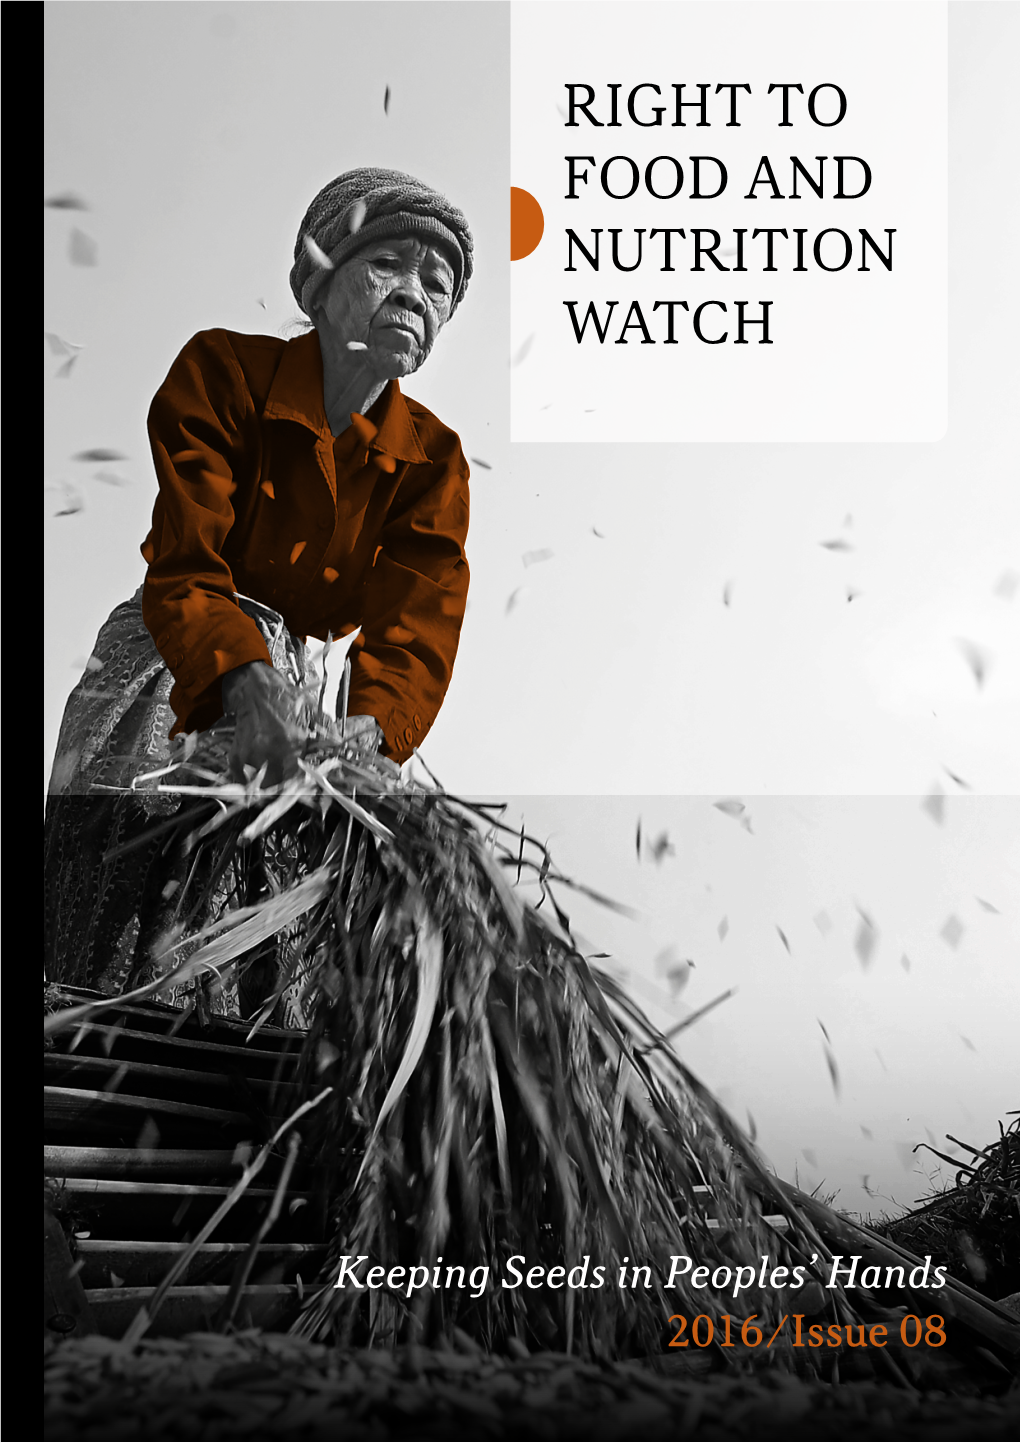 RIGHT to FOOD and NUTRITION WATCH 2016 Keeping Seeds in Peoples’ Hands Keeping Seedsinpeoples’ Hands WATCH NUTRITION FOOD and RIGHT to 2016 ⁄ Issue08